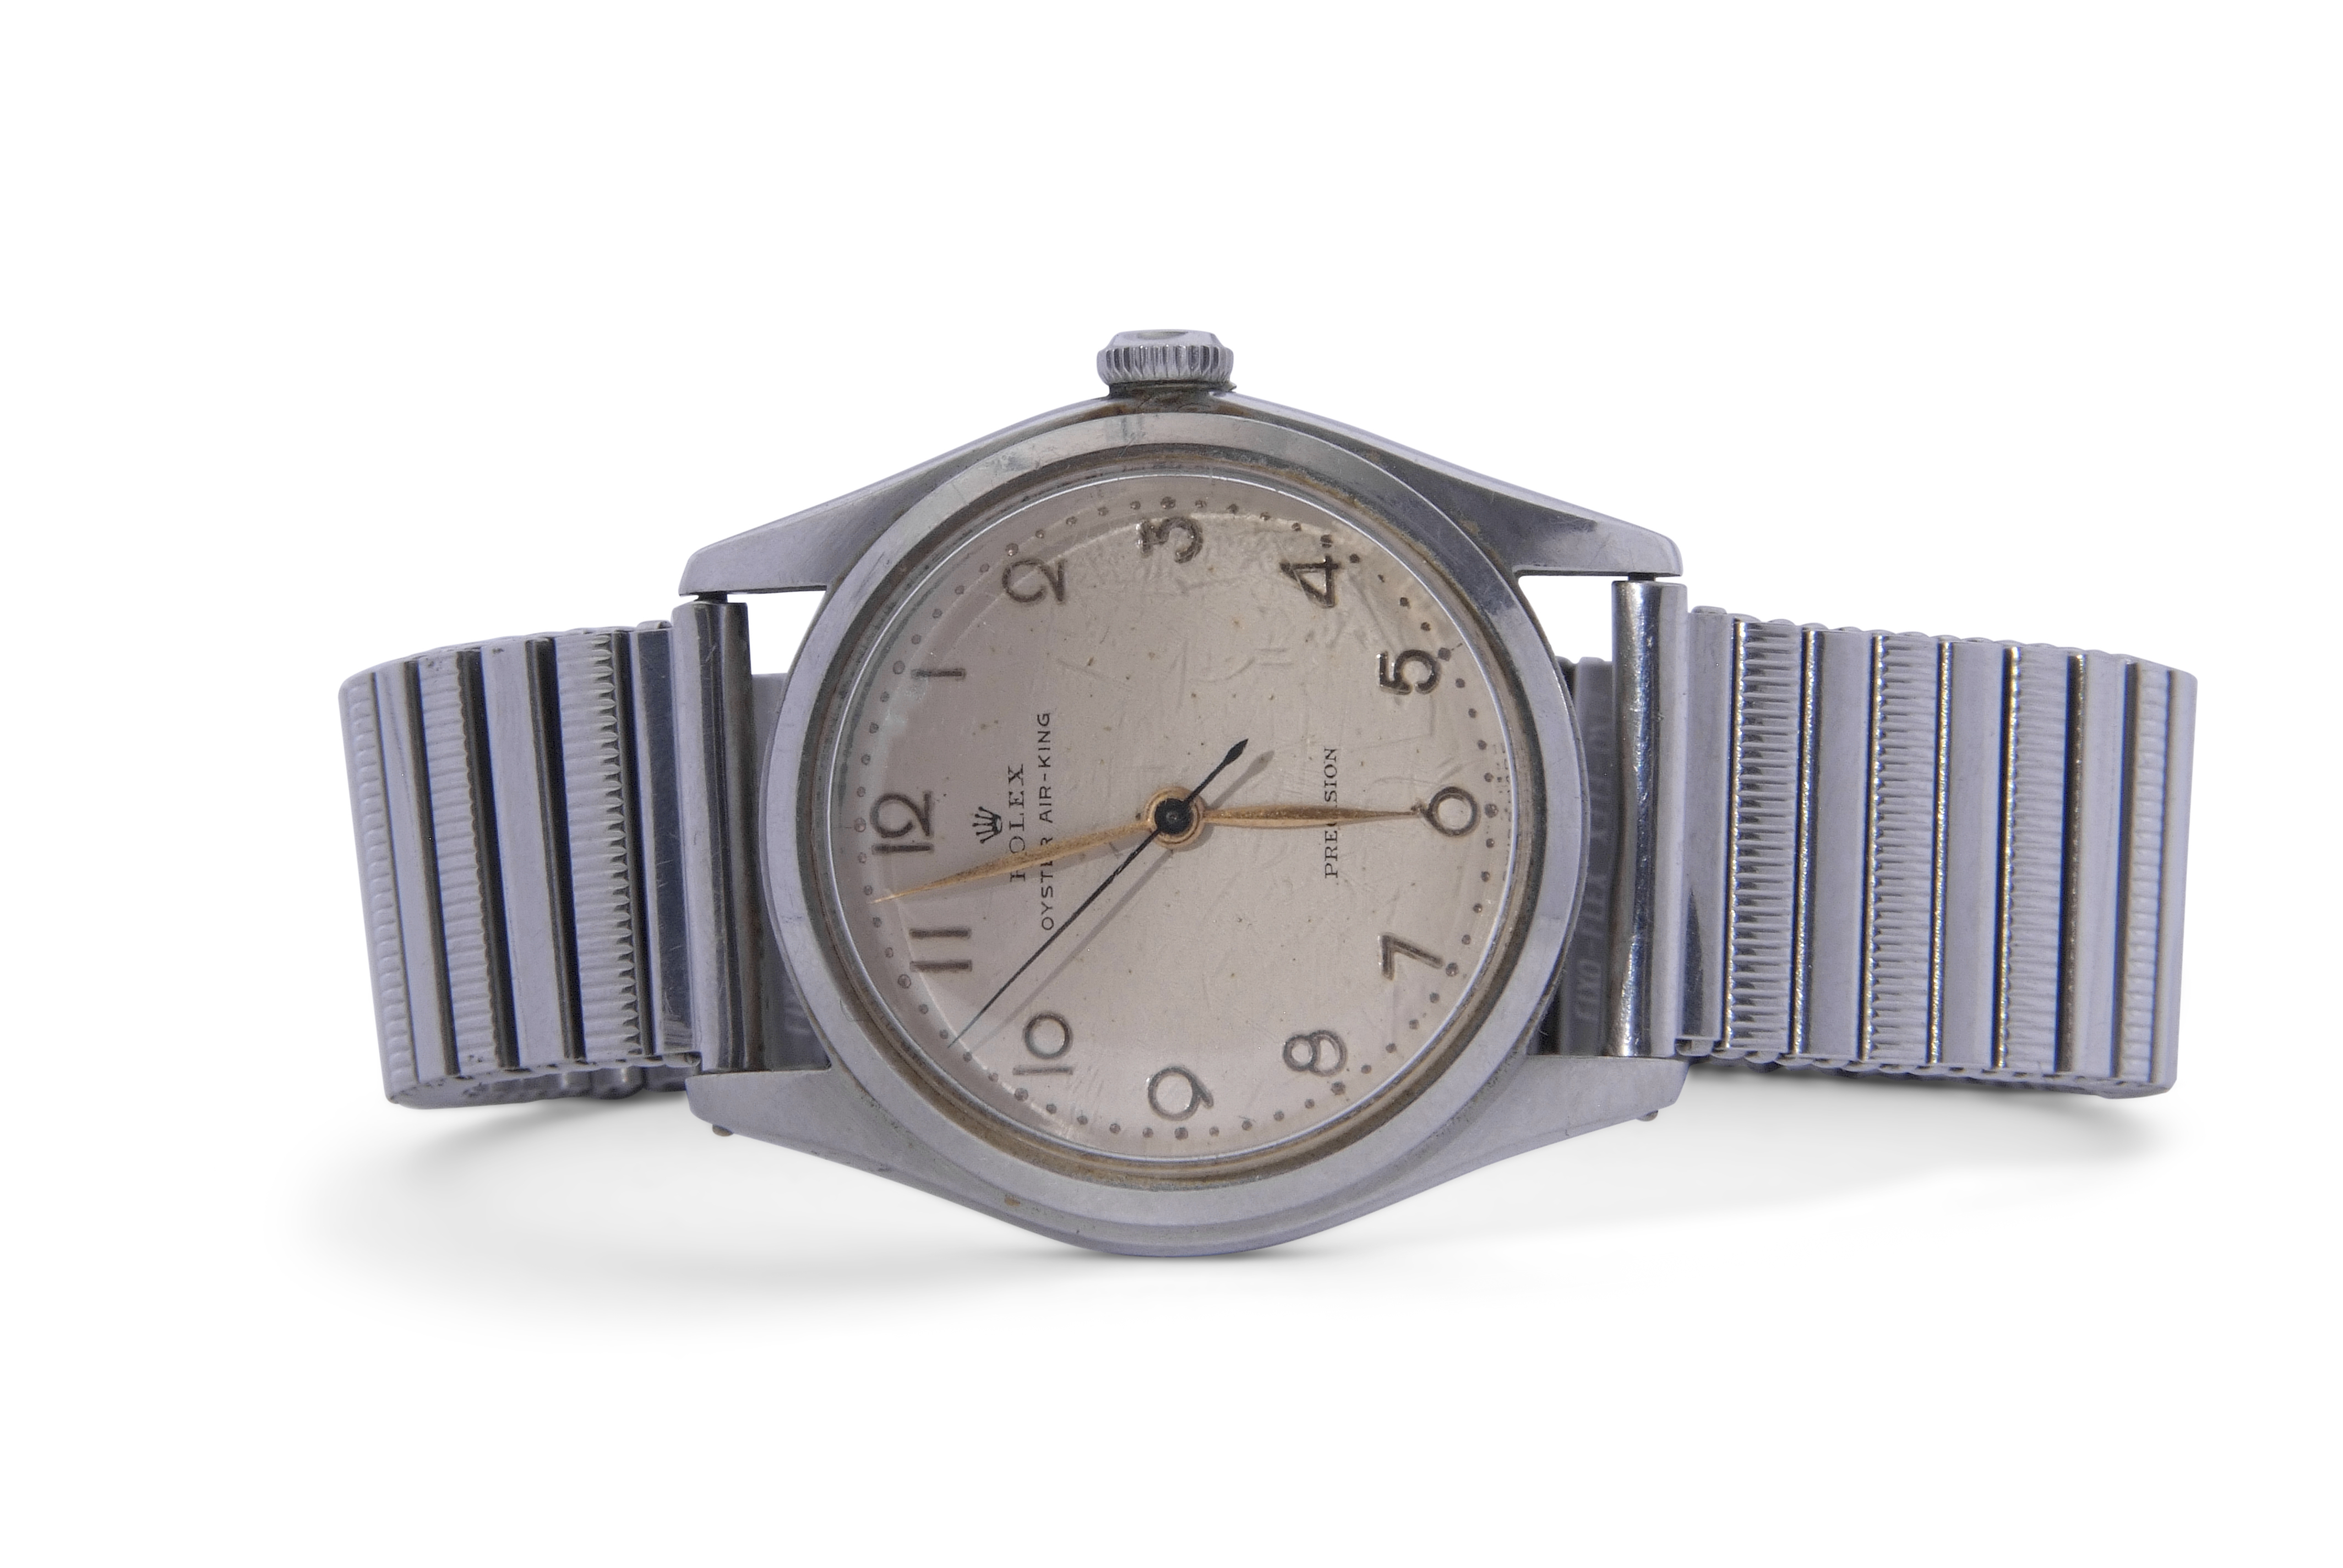 Third quarter of 20th century gents Rolex Oyster Air-King perpetual wrist watch with stainless steel